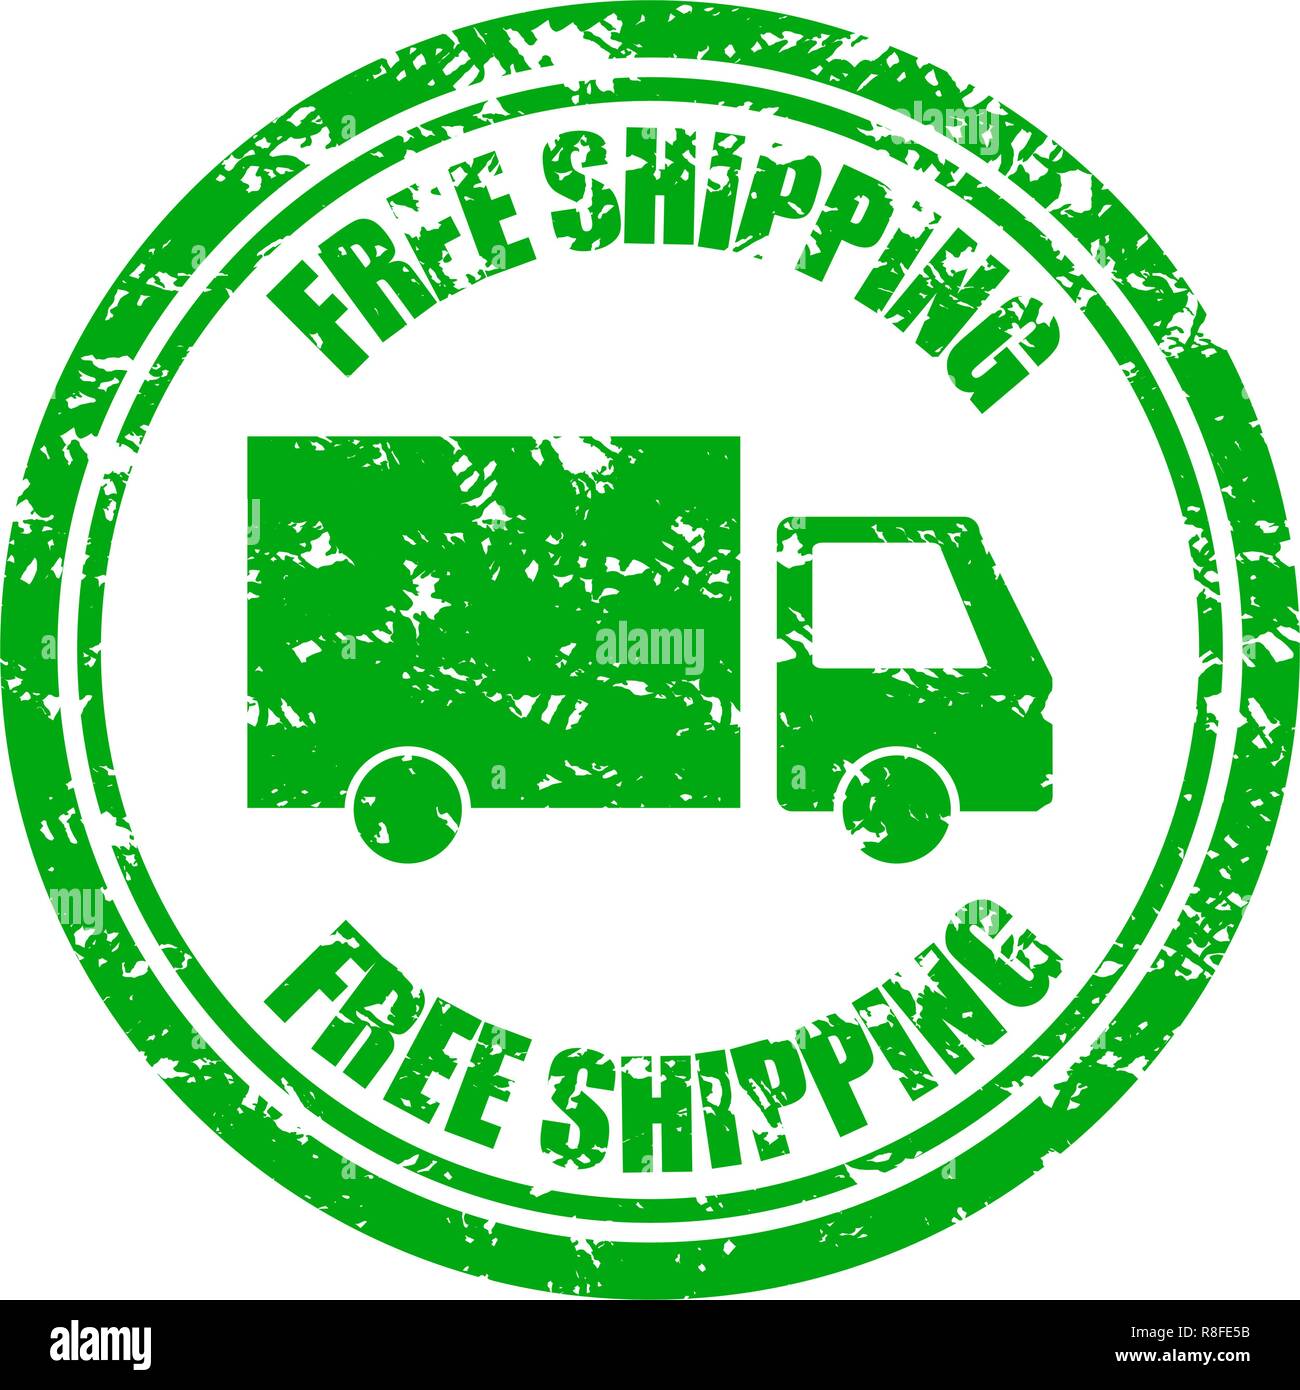 Free shipping guarantee rubber stamp with lorry. Grunge rubber delivery stamp for business moving service. Vector illustration Stock Vector